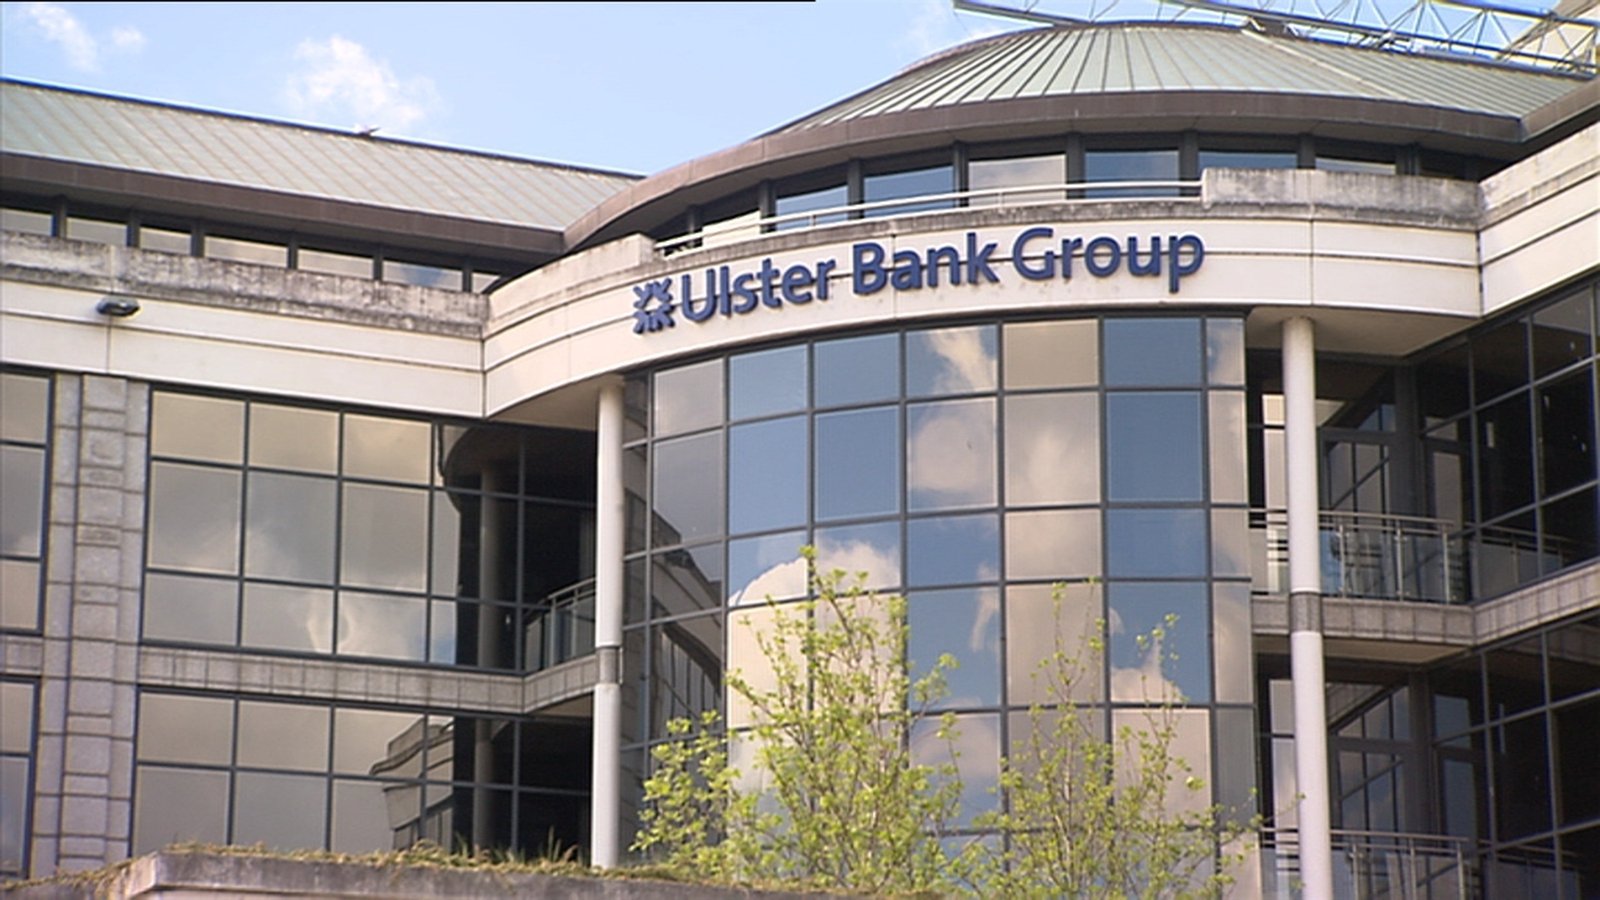 Ulster Bank customers to get refund after overcharging